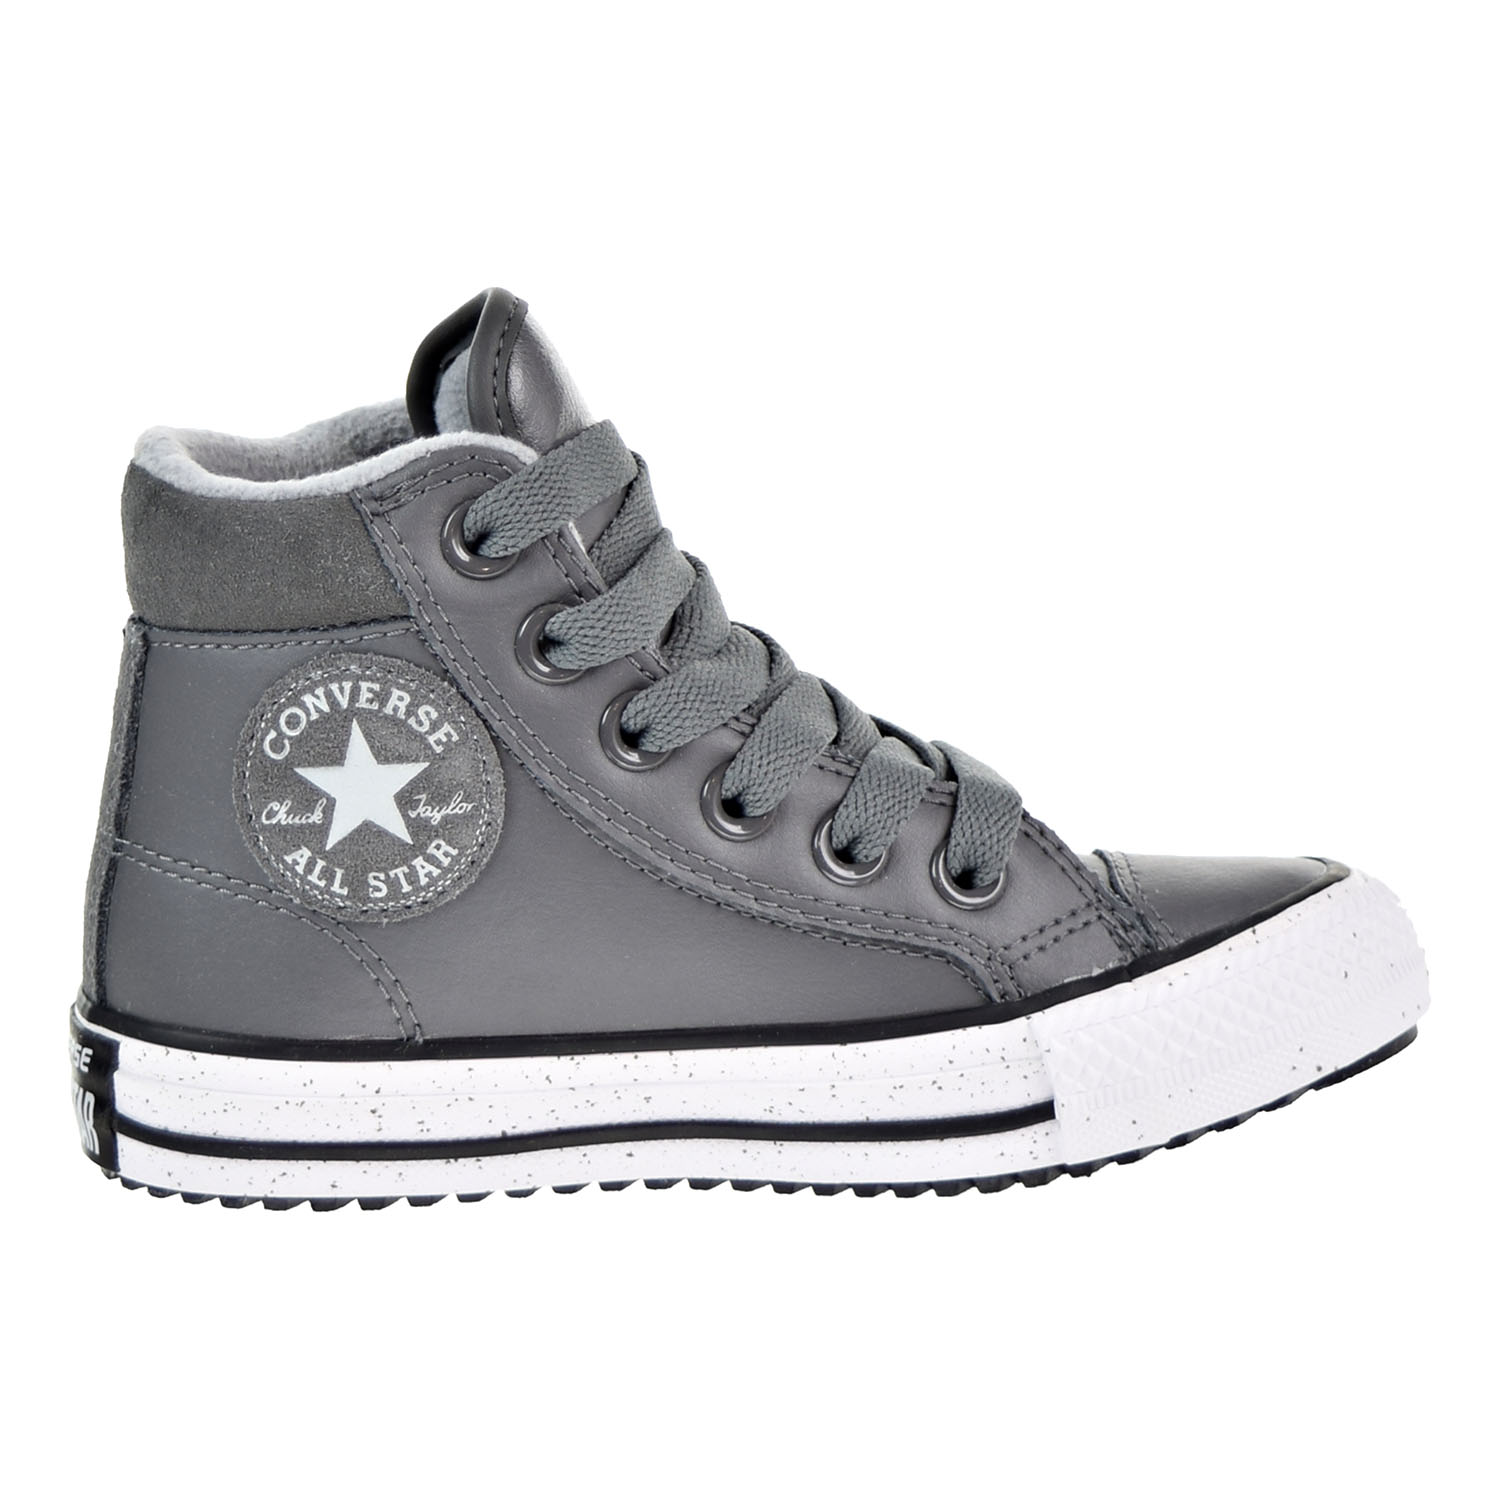 converse boot pc tumbled leather unisex boot